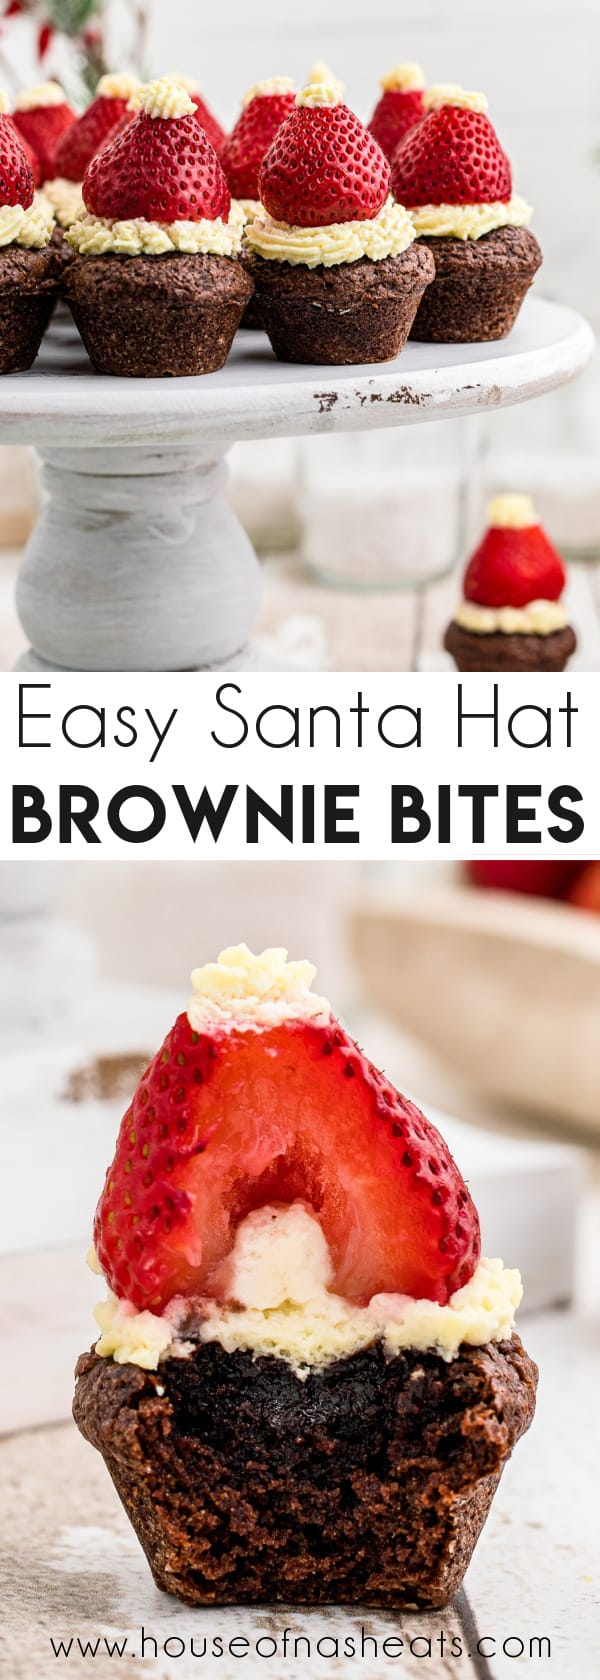 A collage of images showing brownie bites with strawberry Santa hats with text overlay.